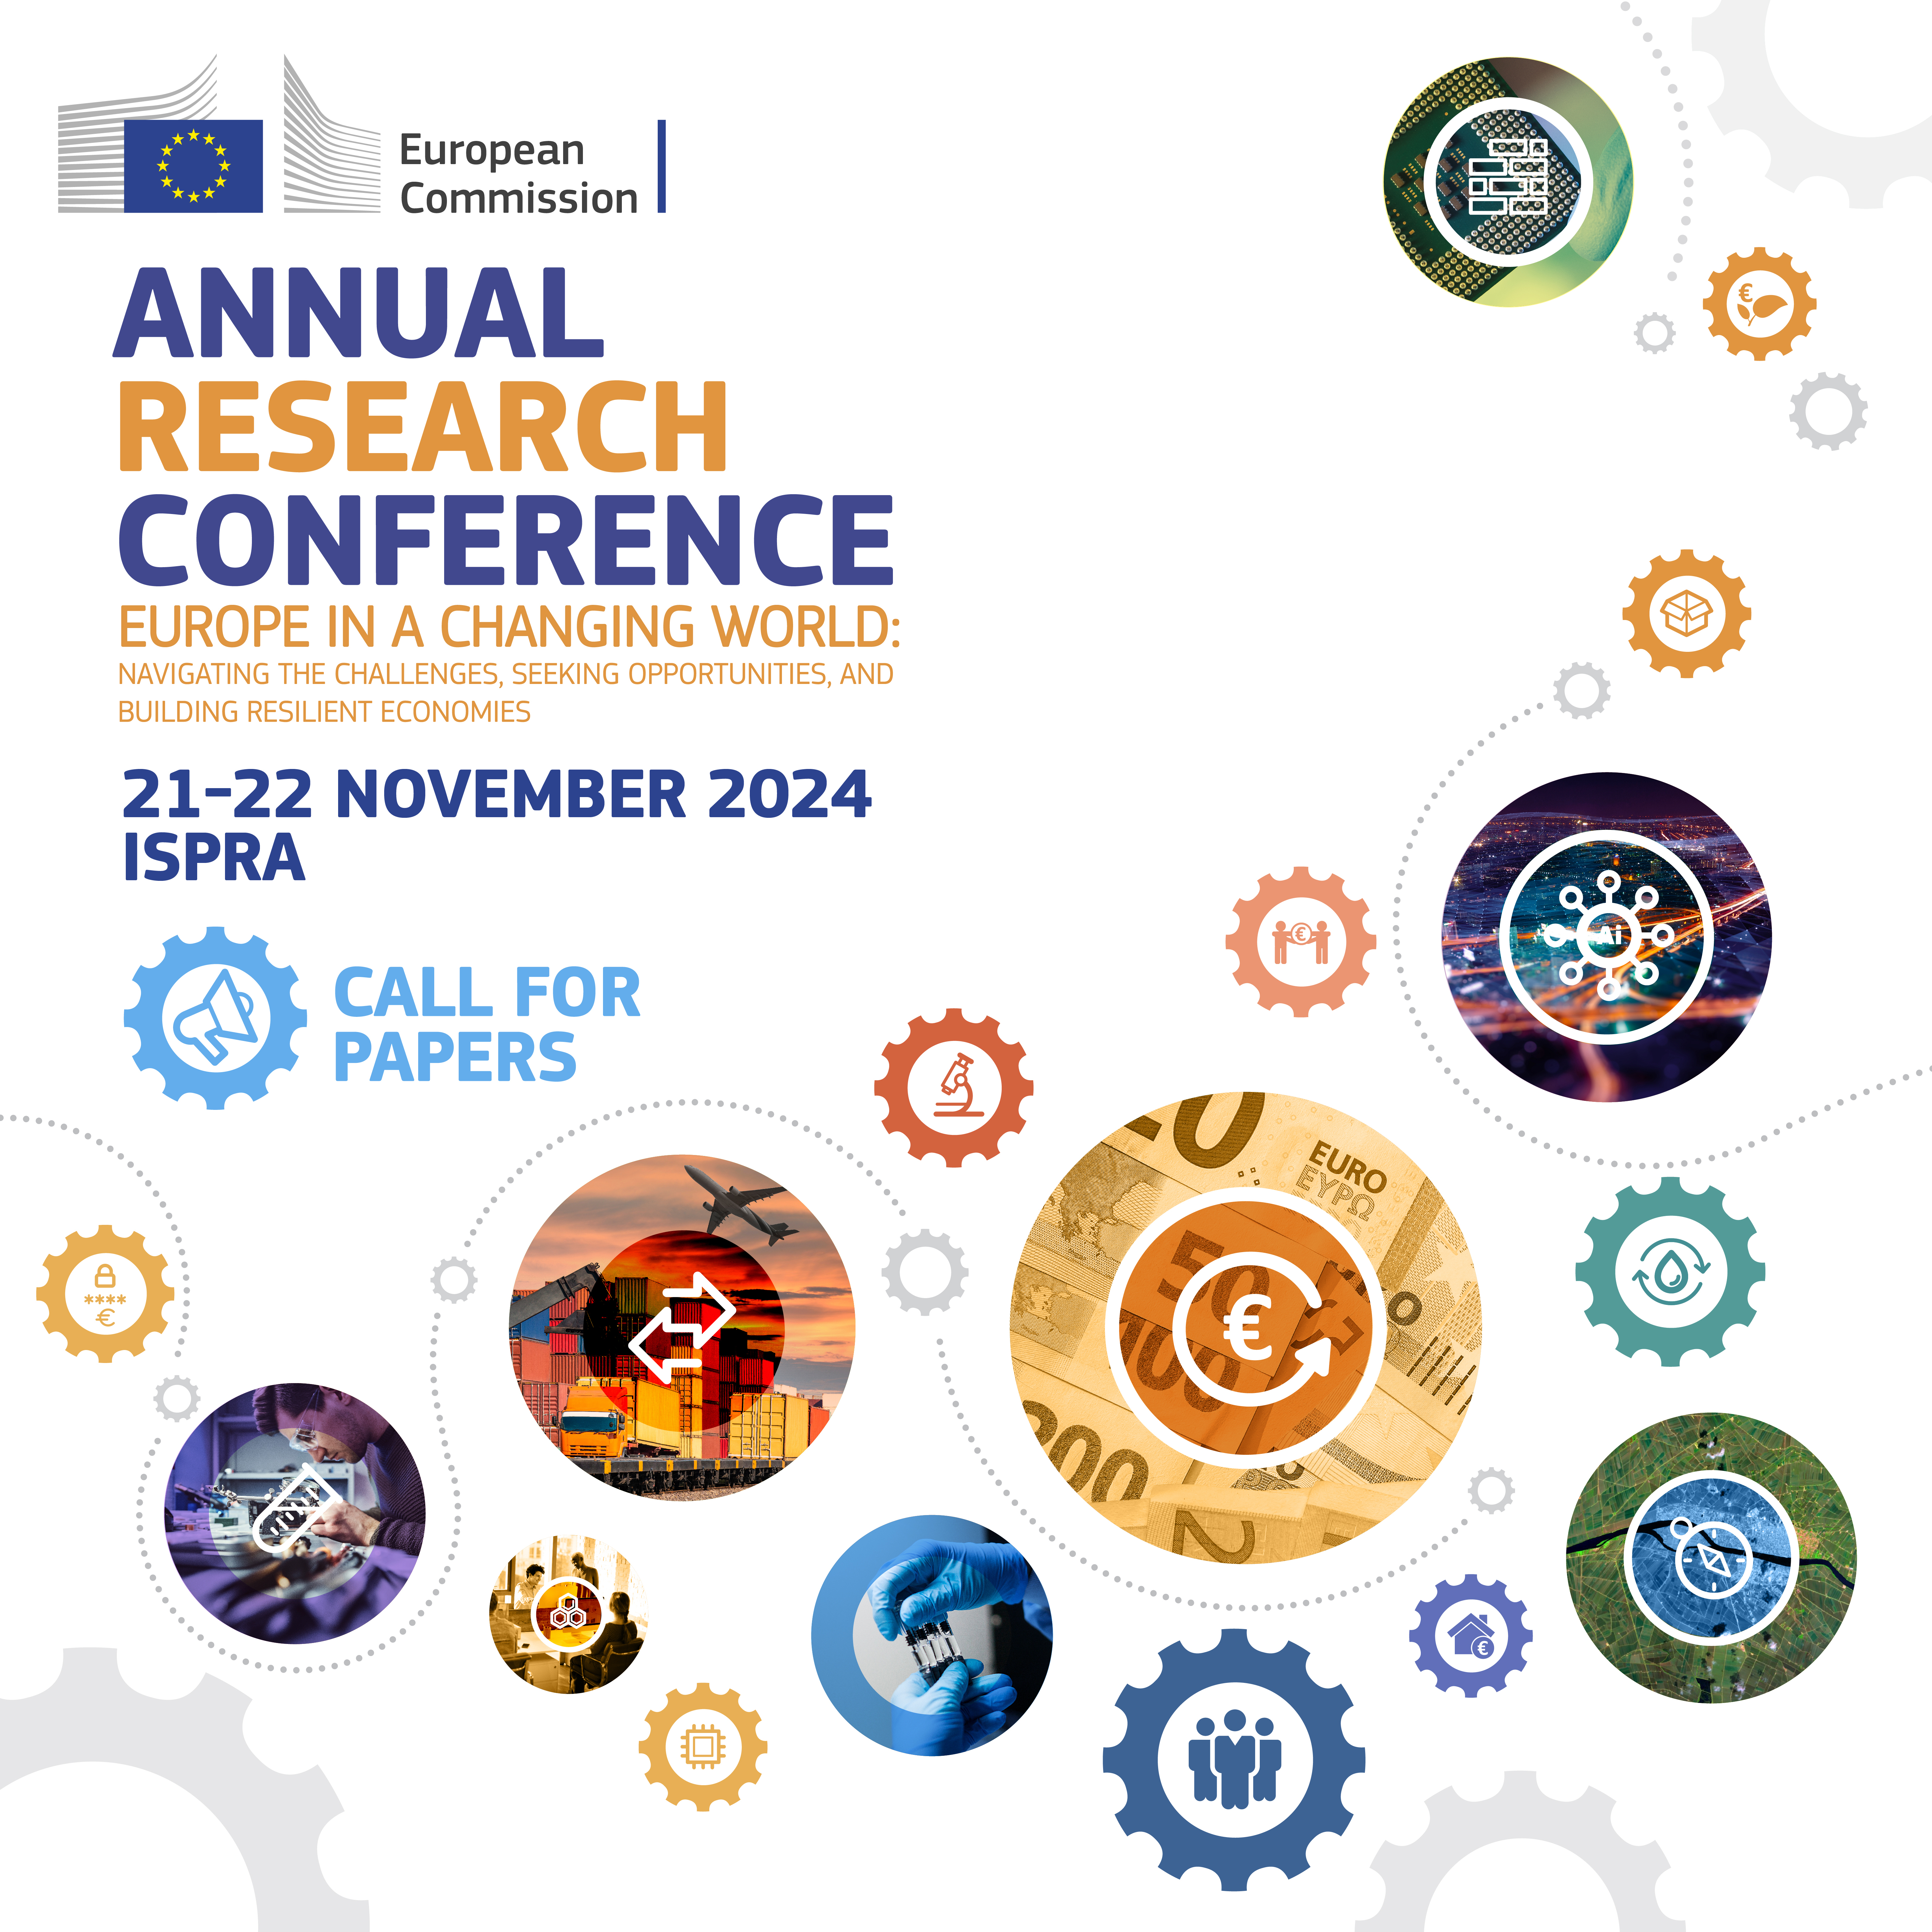 Image of the Annual Research Conference 2024